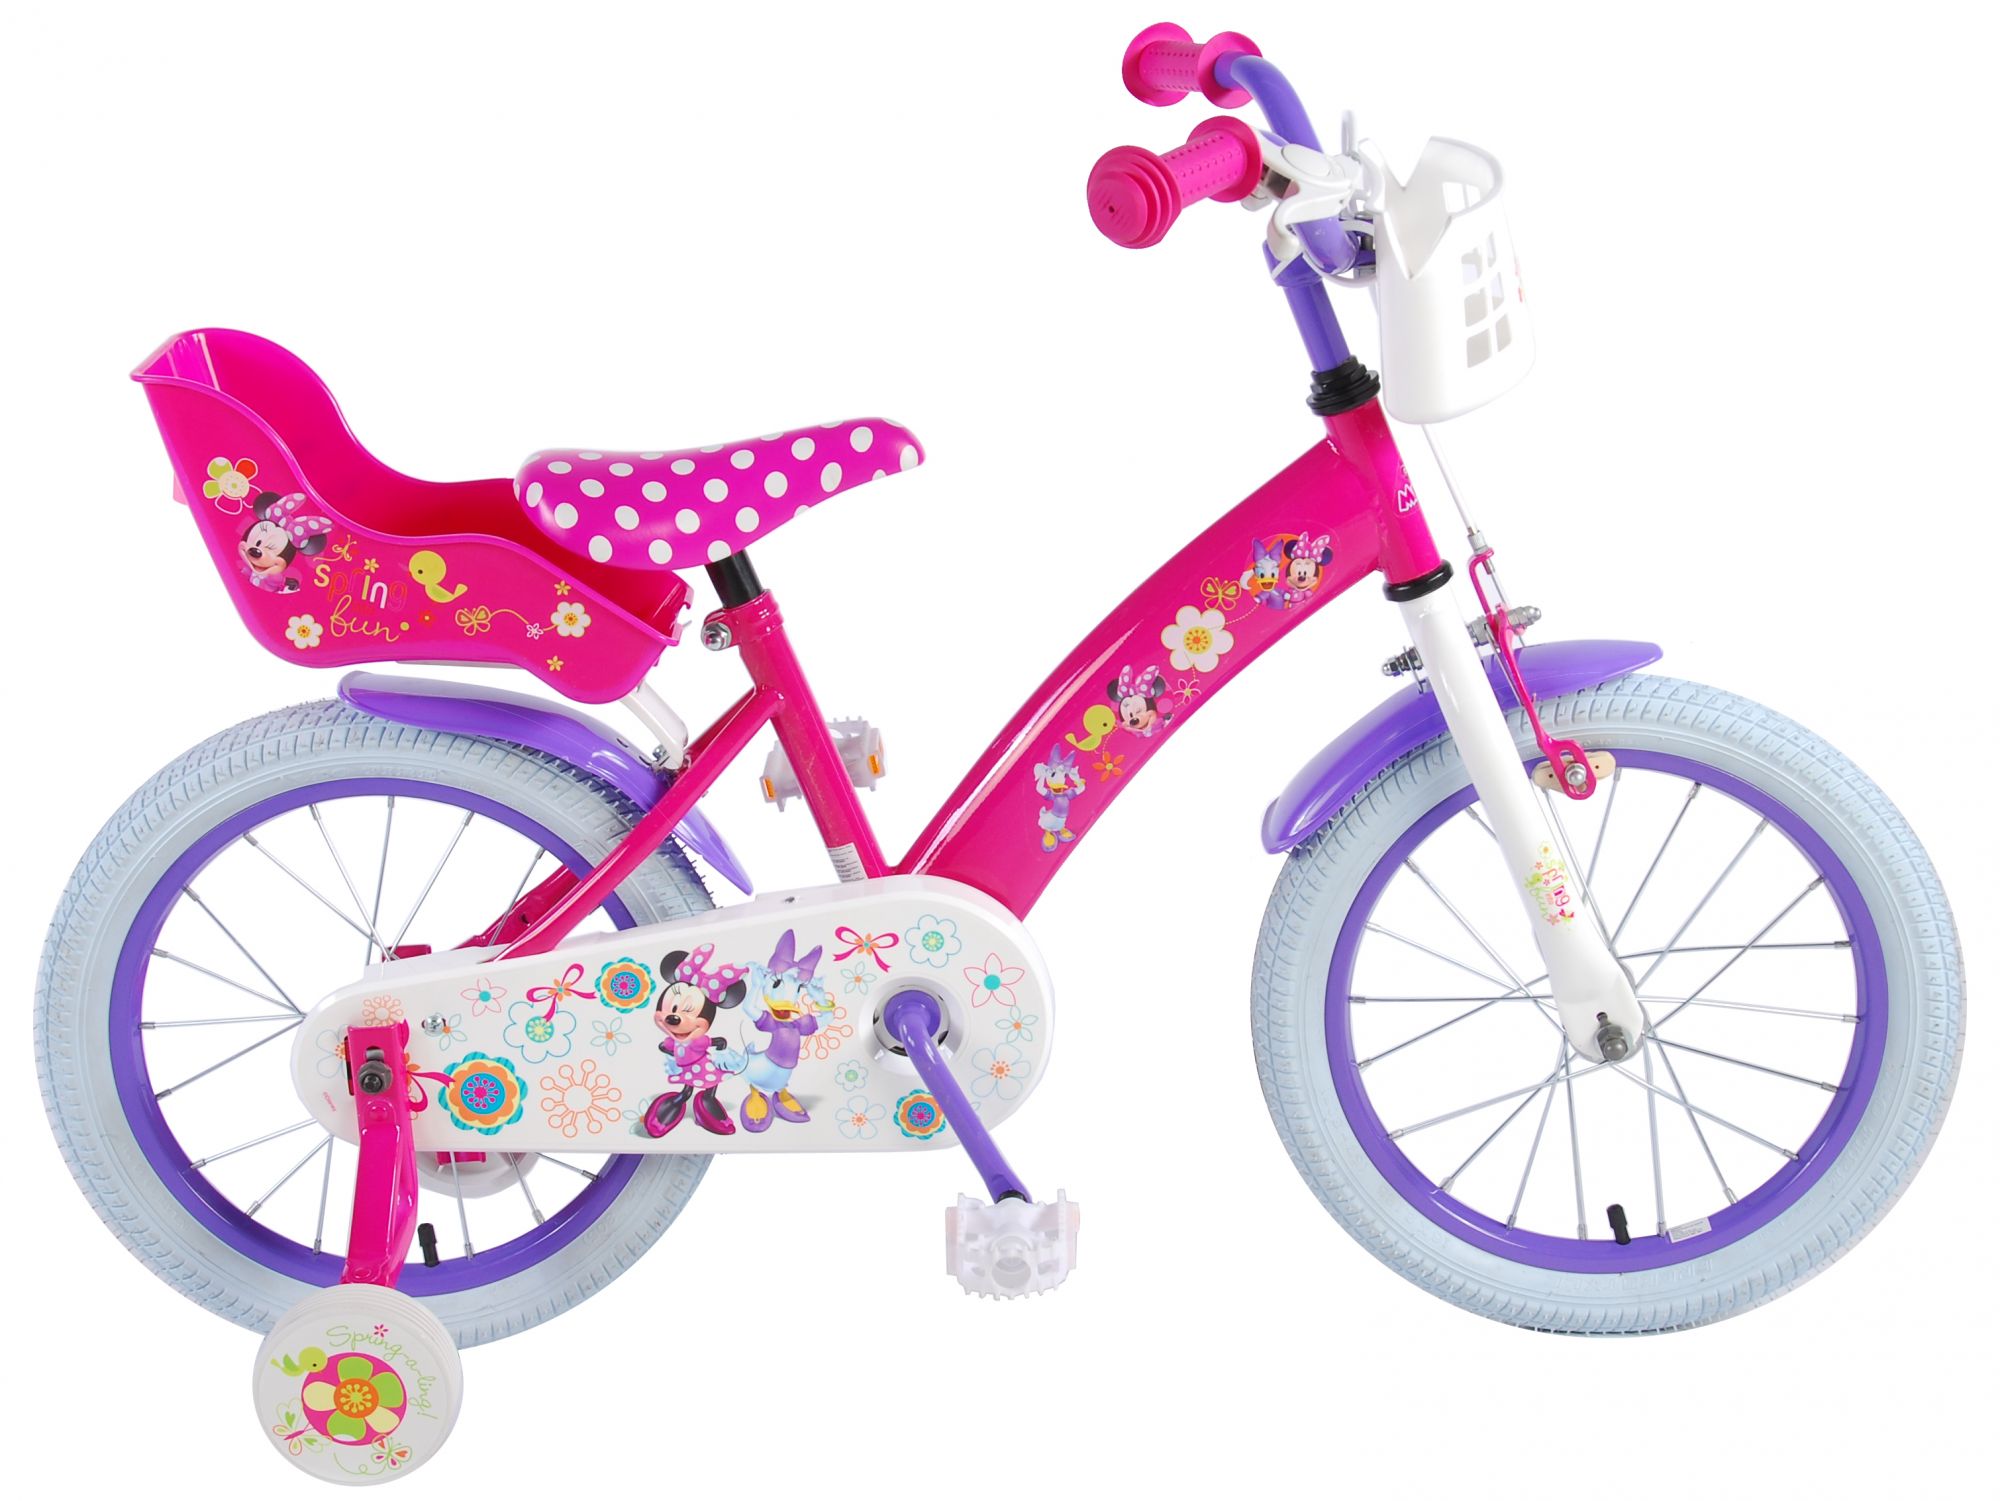 children's bicycle with training wheels